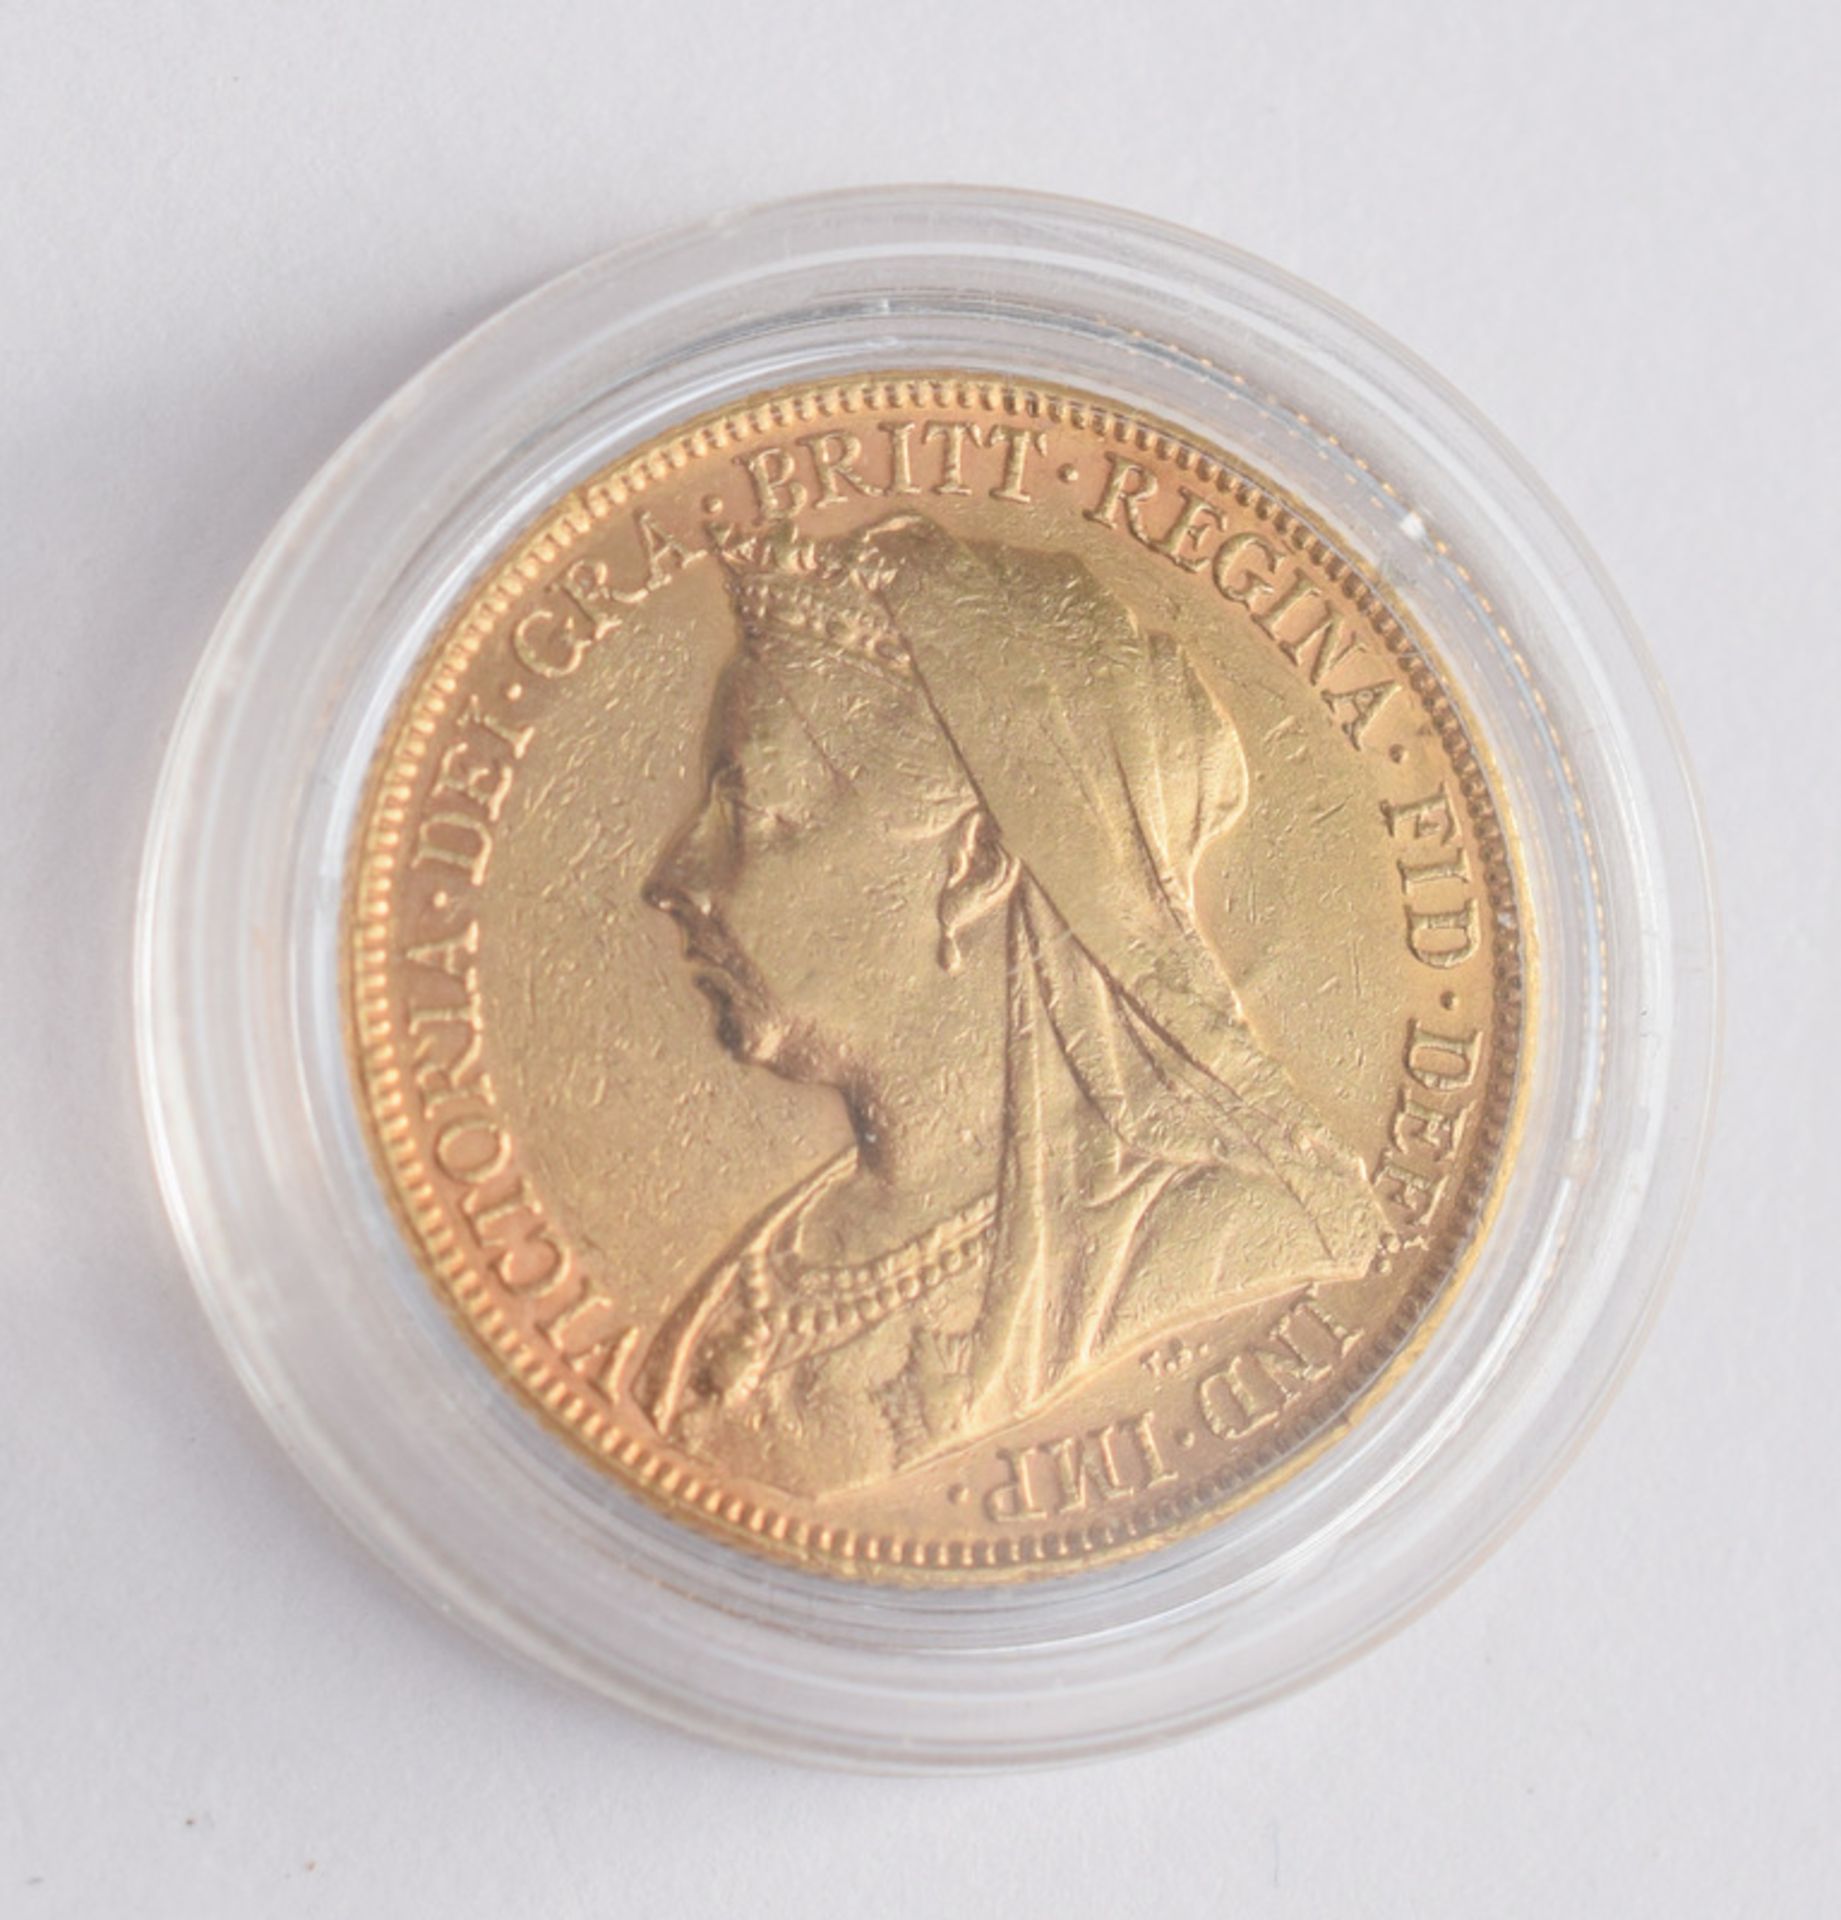 Victorian Gold Sovereign 1899 Melbourne Mint - Image 2 of 5